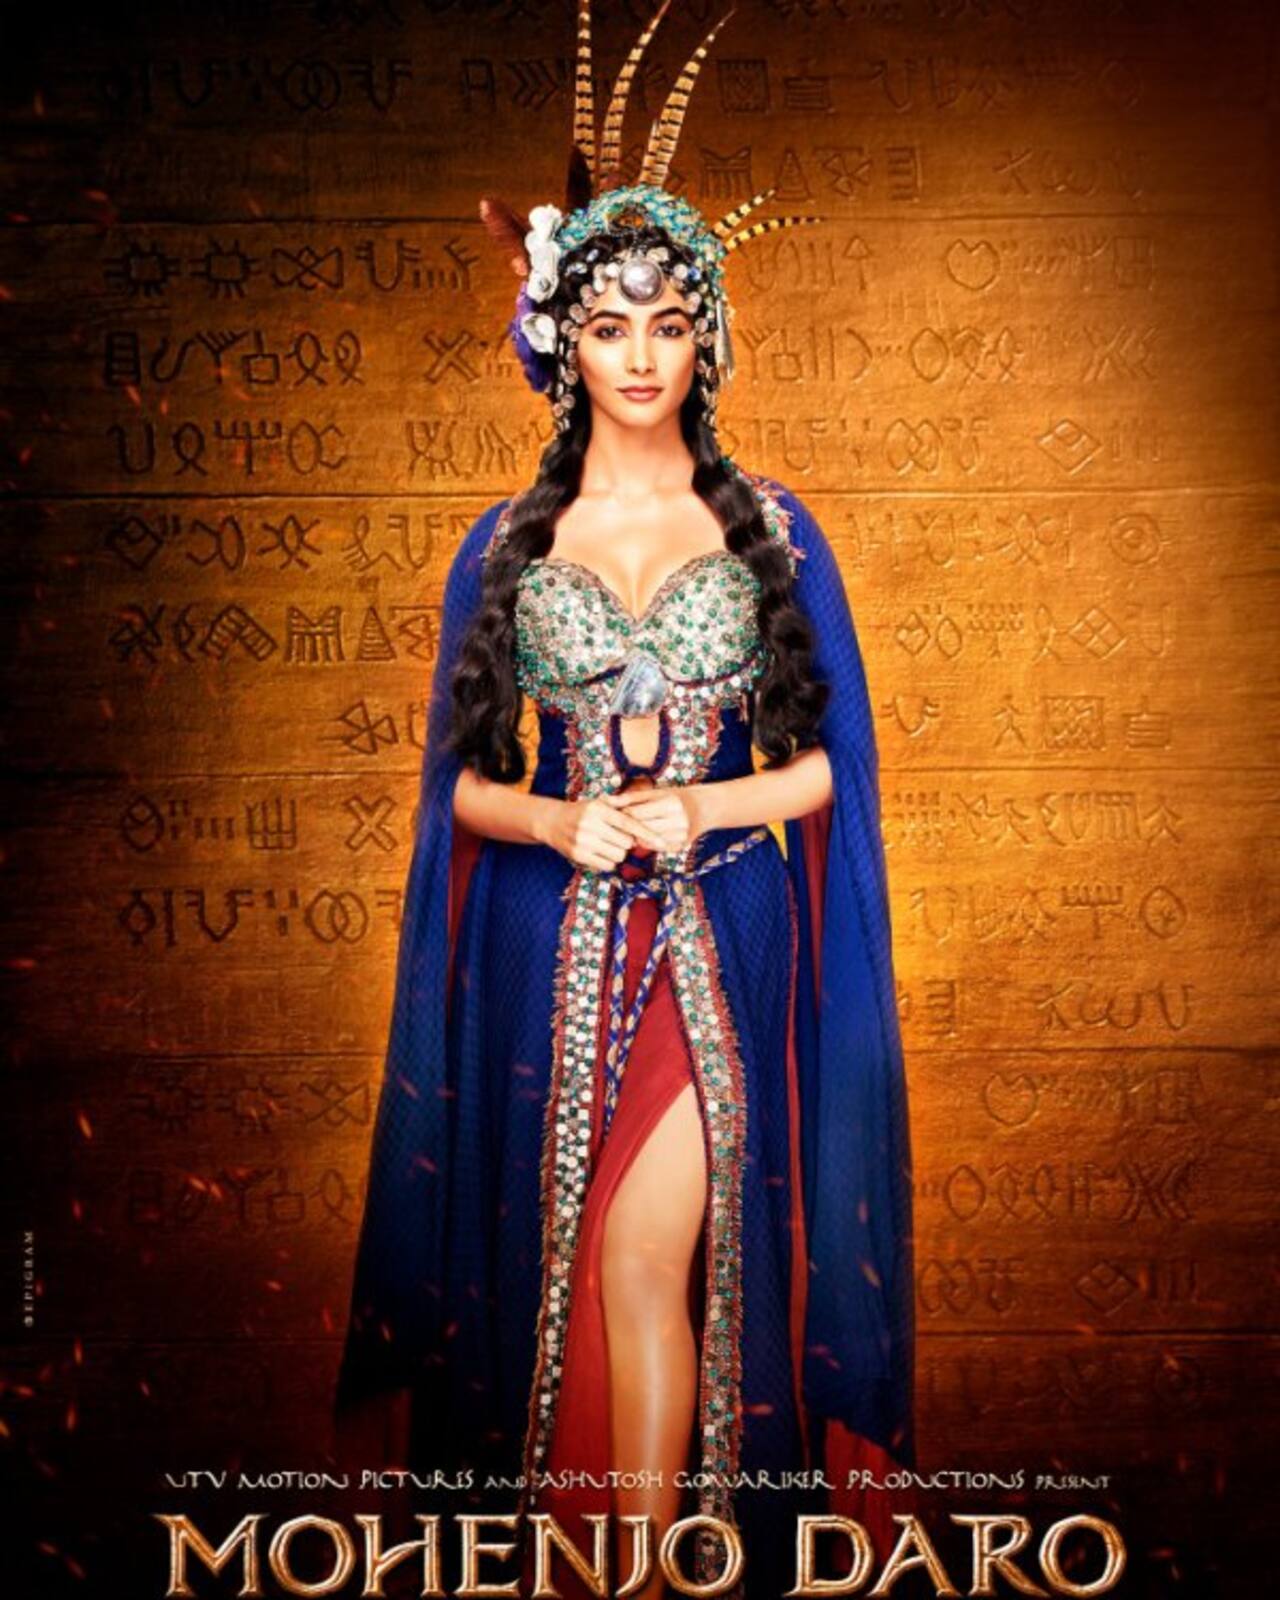 Pooja Hegde looks STUNNING as Chaani in the new poster of Hrithik Roshan's Mohenjo  Daro! - Bollywood News & Gossip, Movie Reviews, Trailers & Videos at  